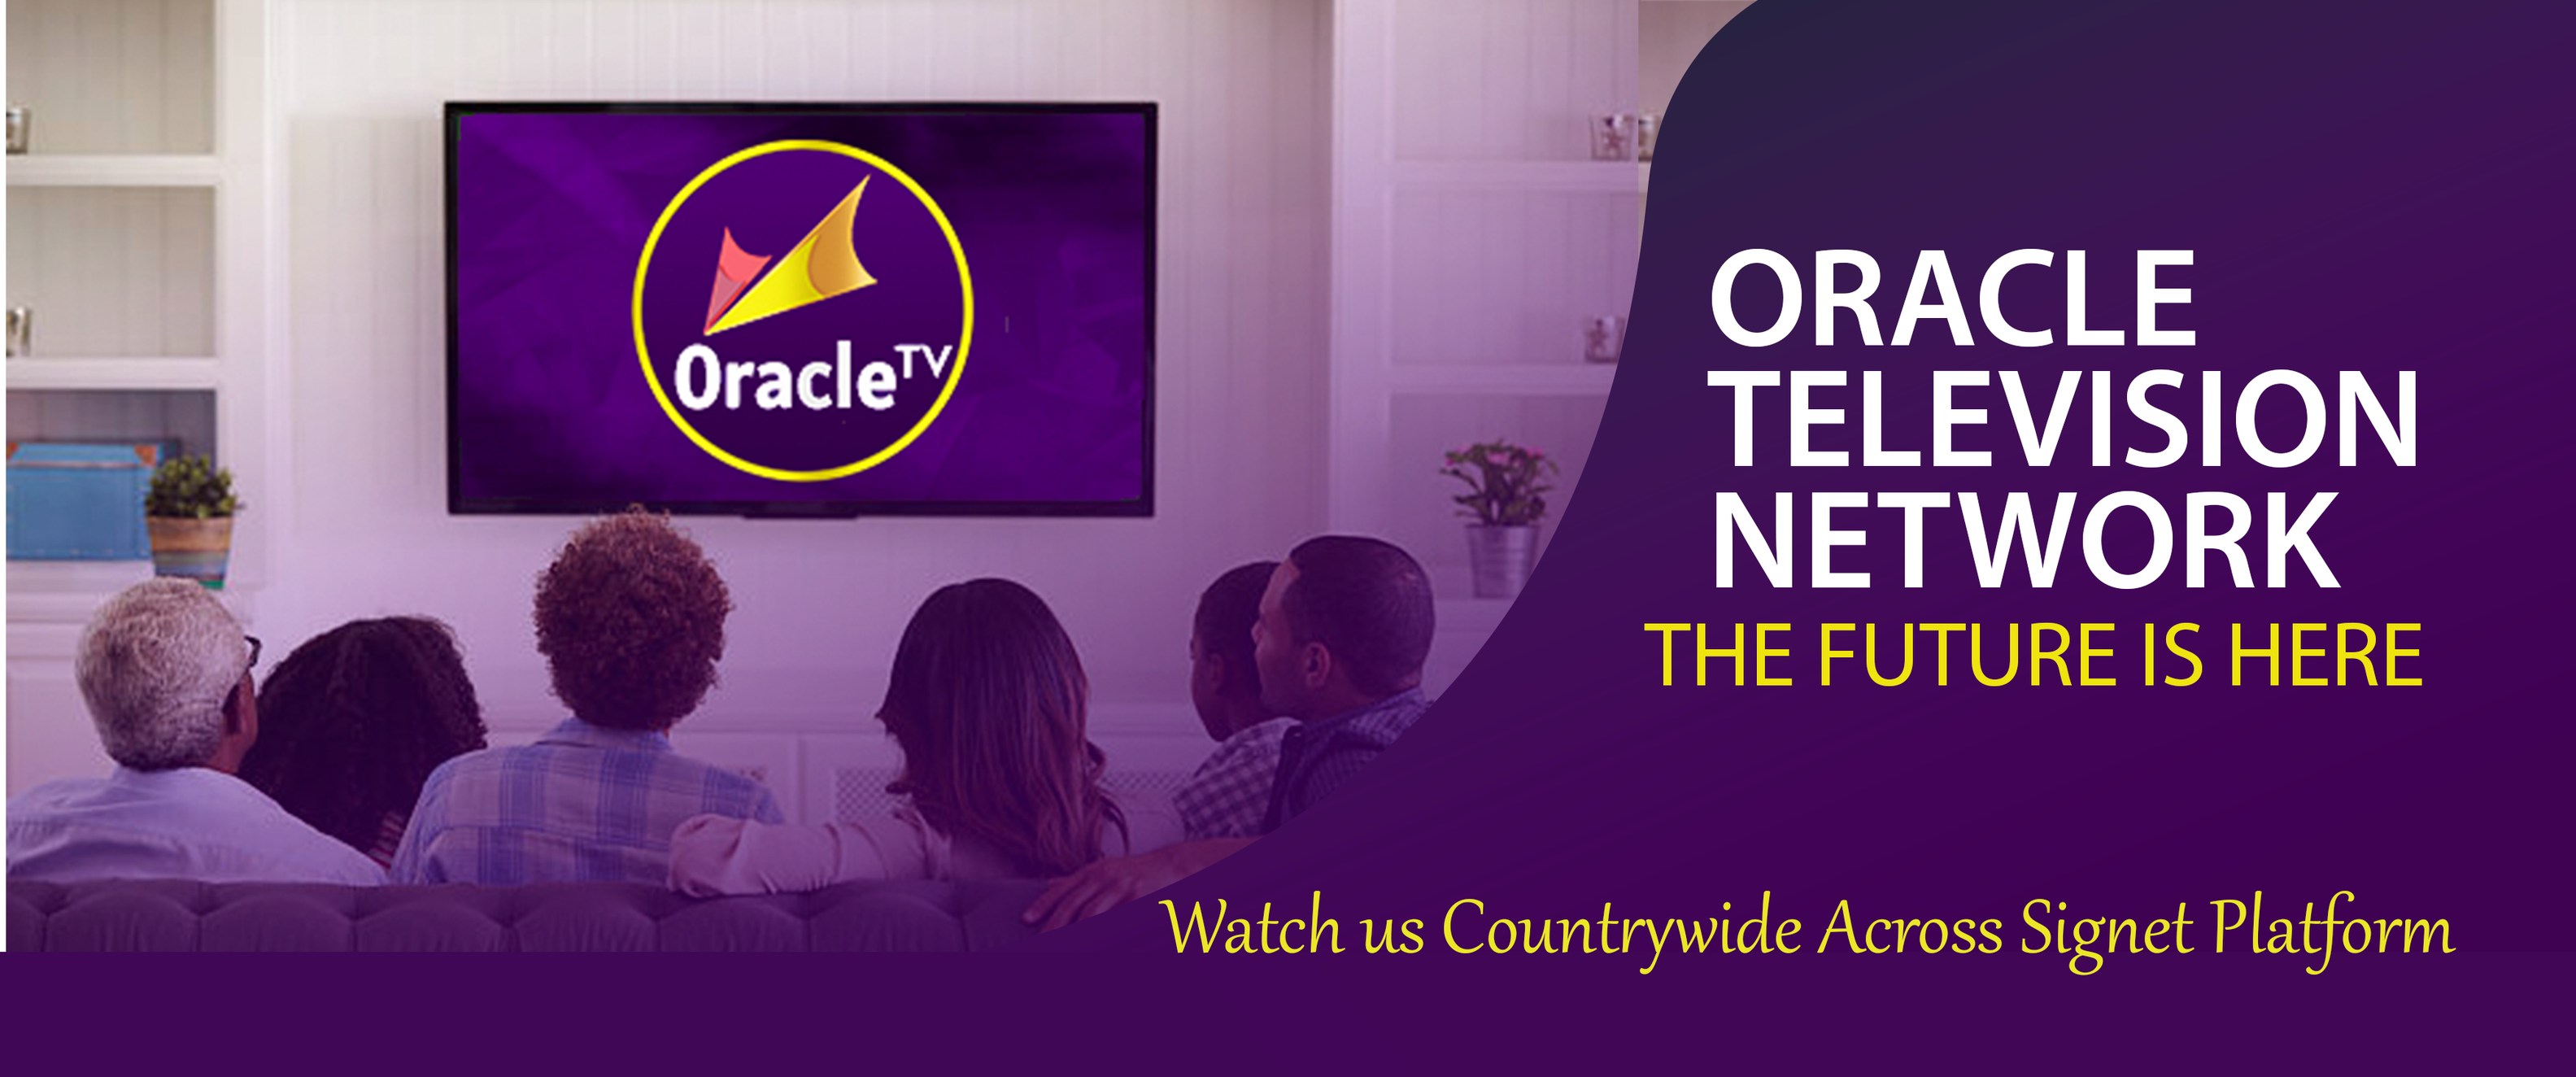 Oracle TV Live